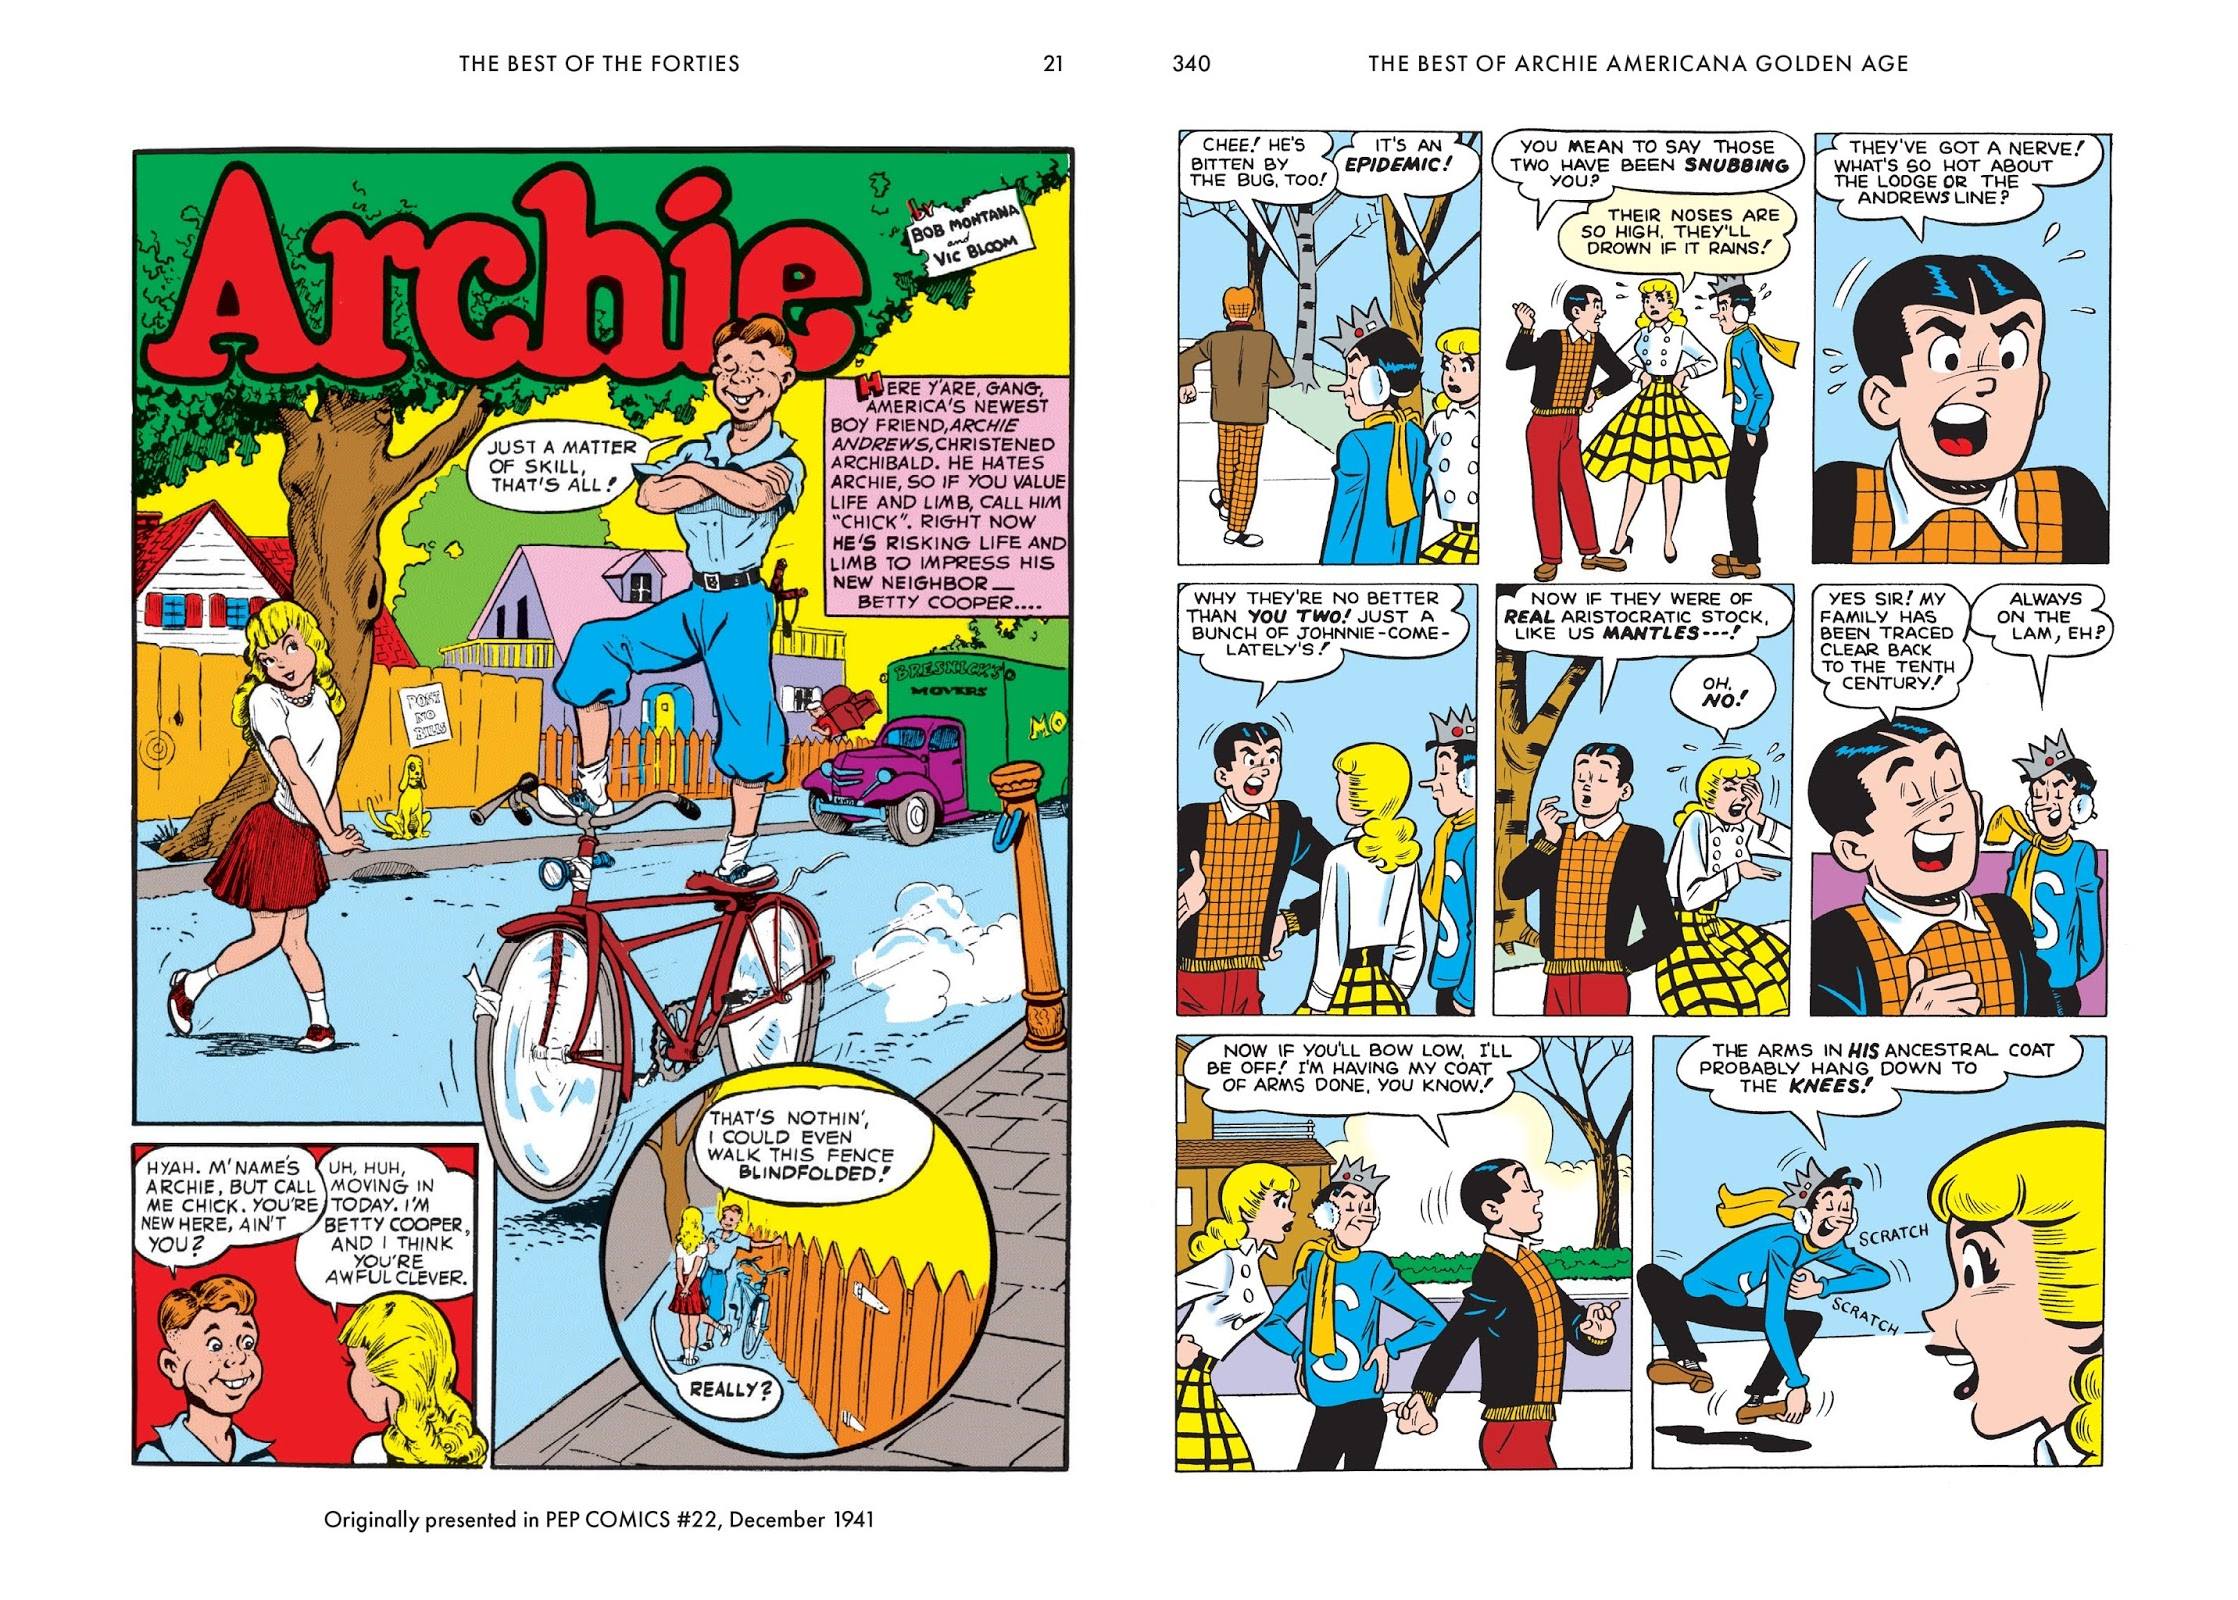 The Best of Archie Americana Golden Age review